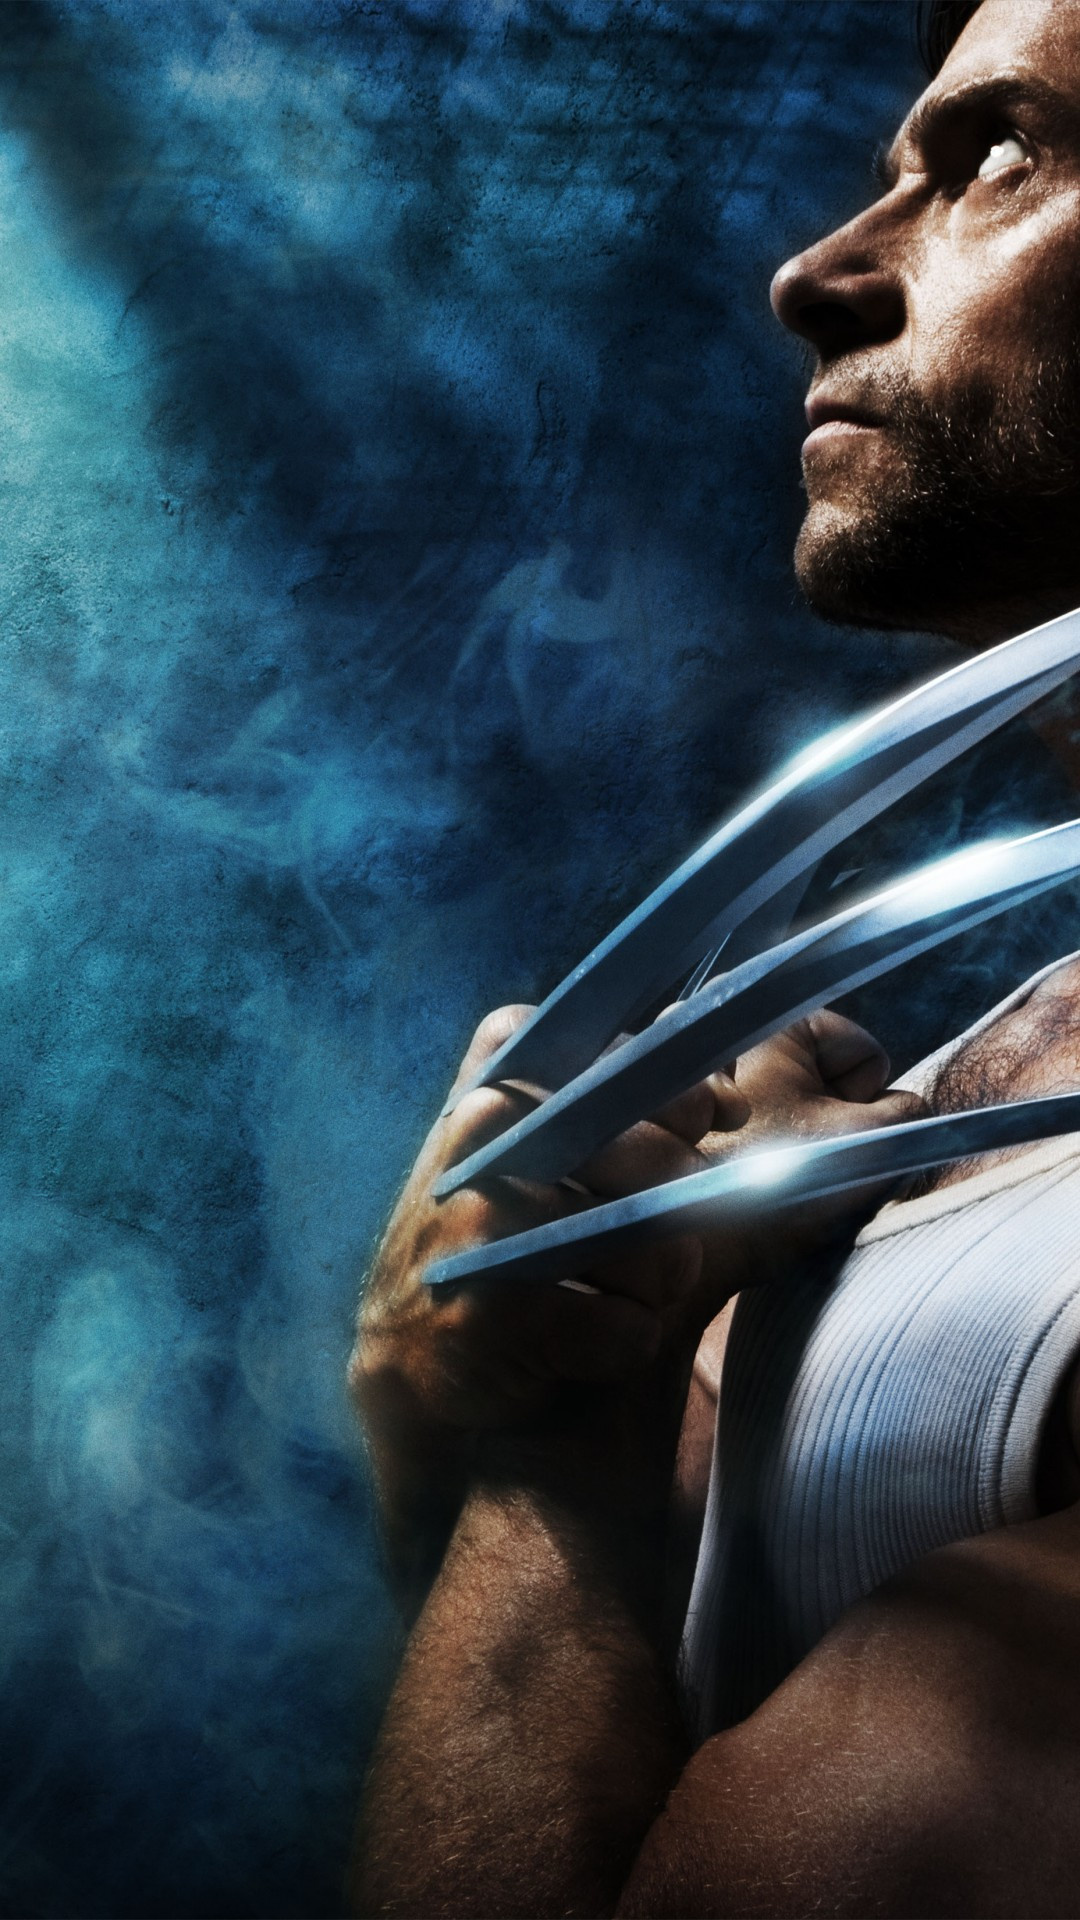 X-Men Origins: Wolverine, iPhone wallpapers, Wolverine's legacy, Dynamic images, 1080x1920 Full HD Phone